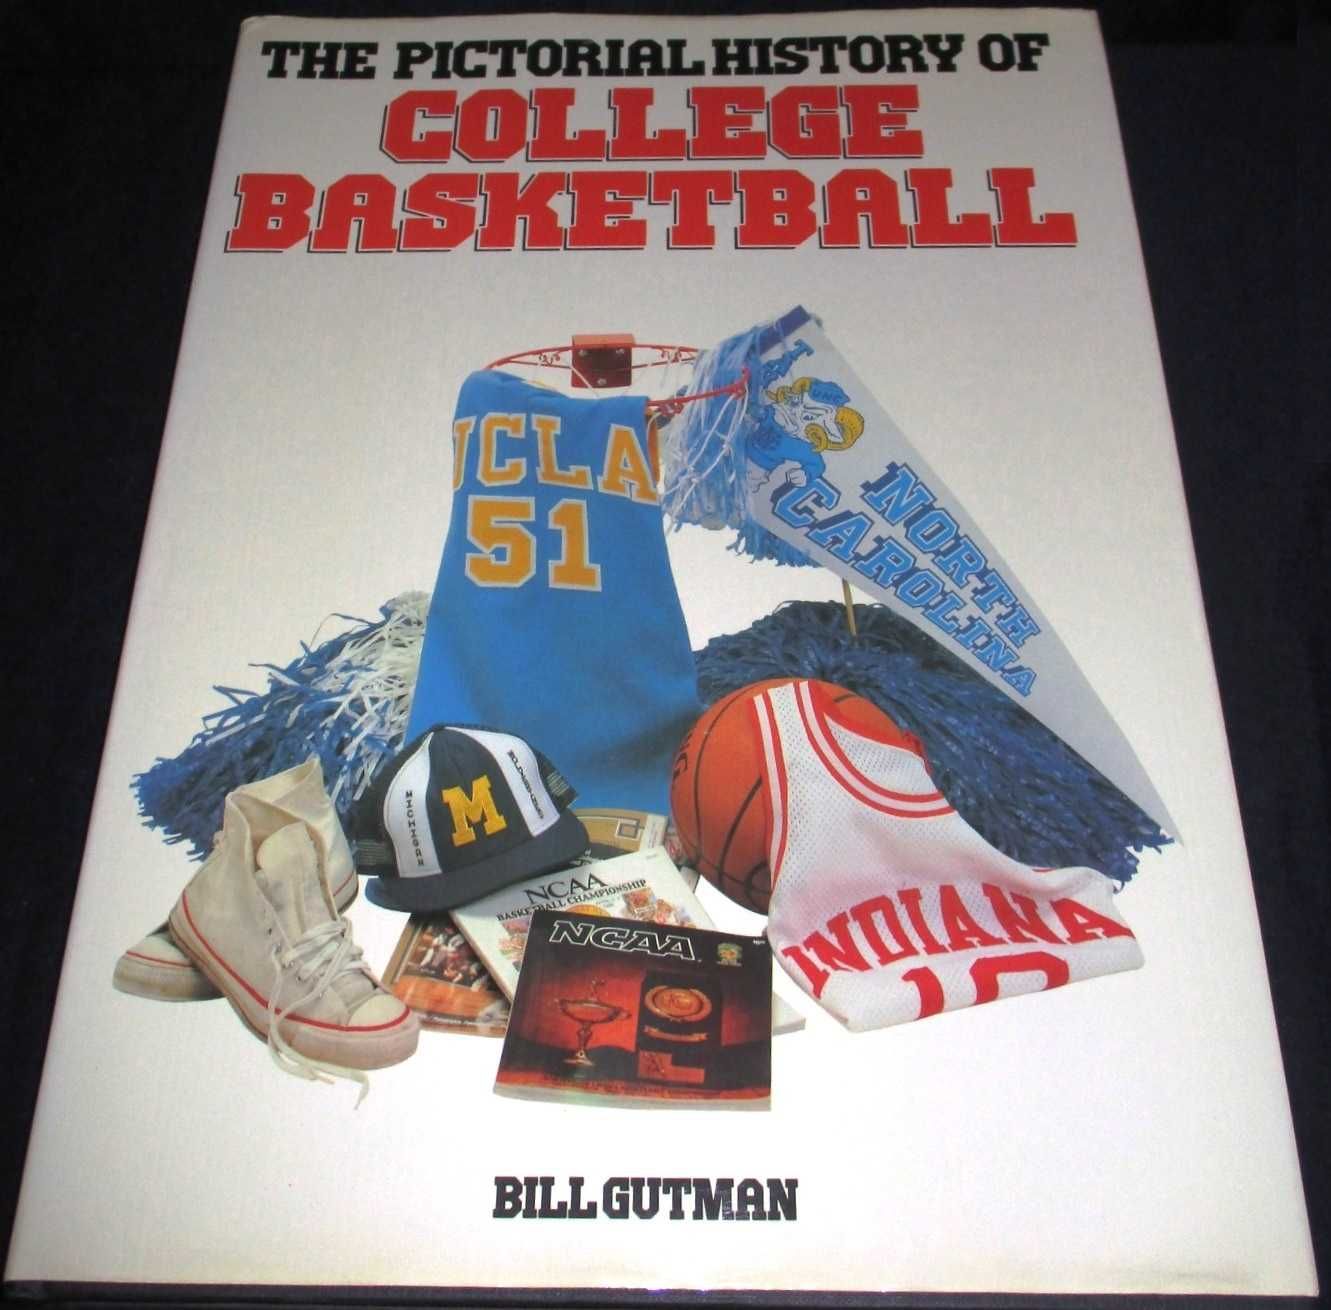 Livro Pictorial History of College Basketball Bill Gutman